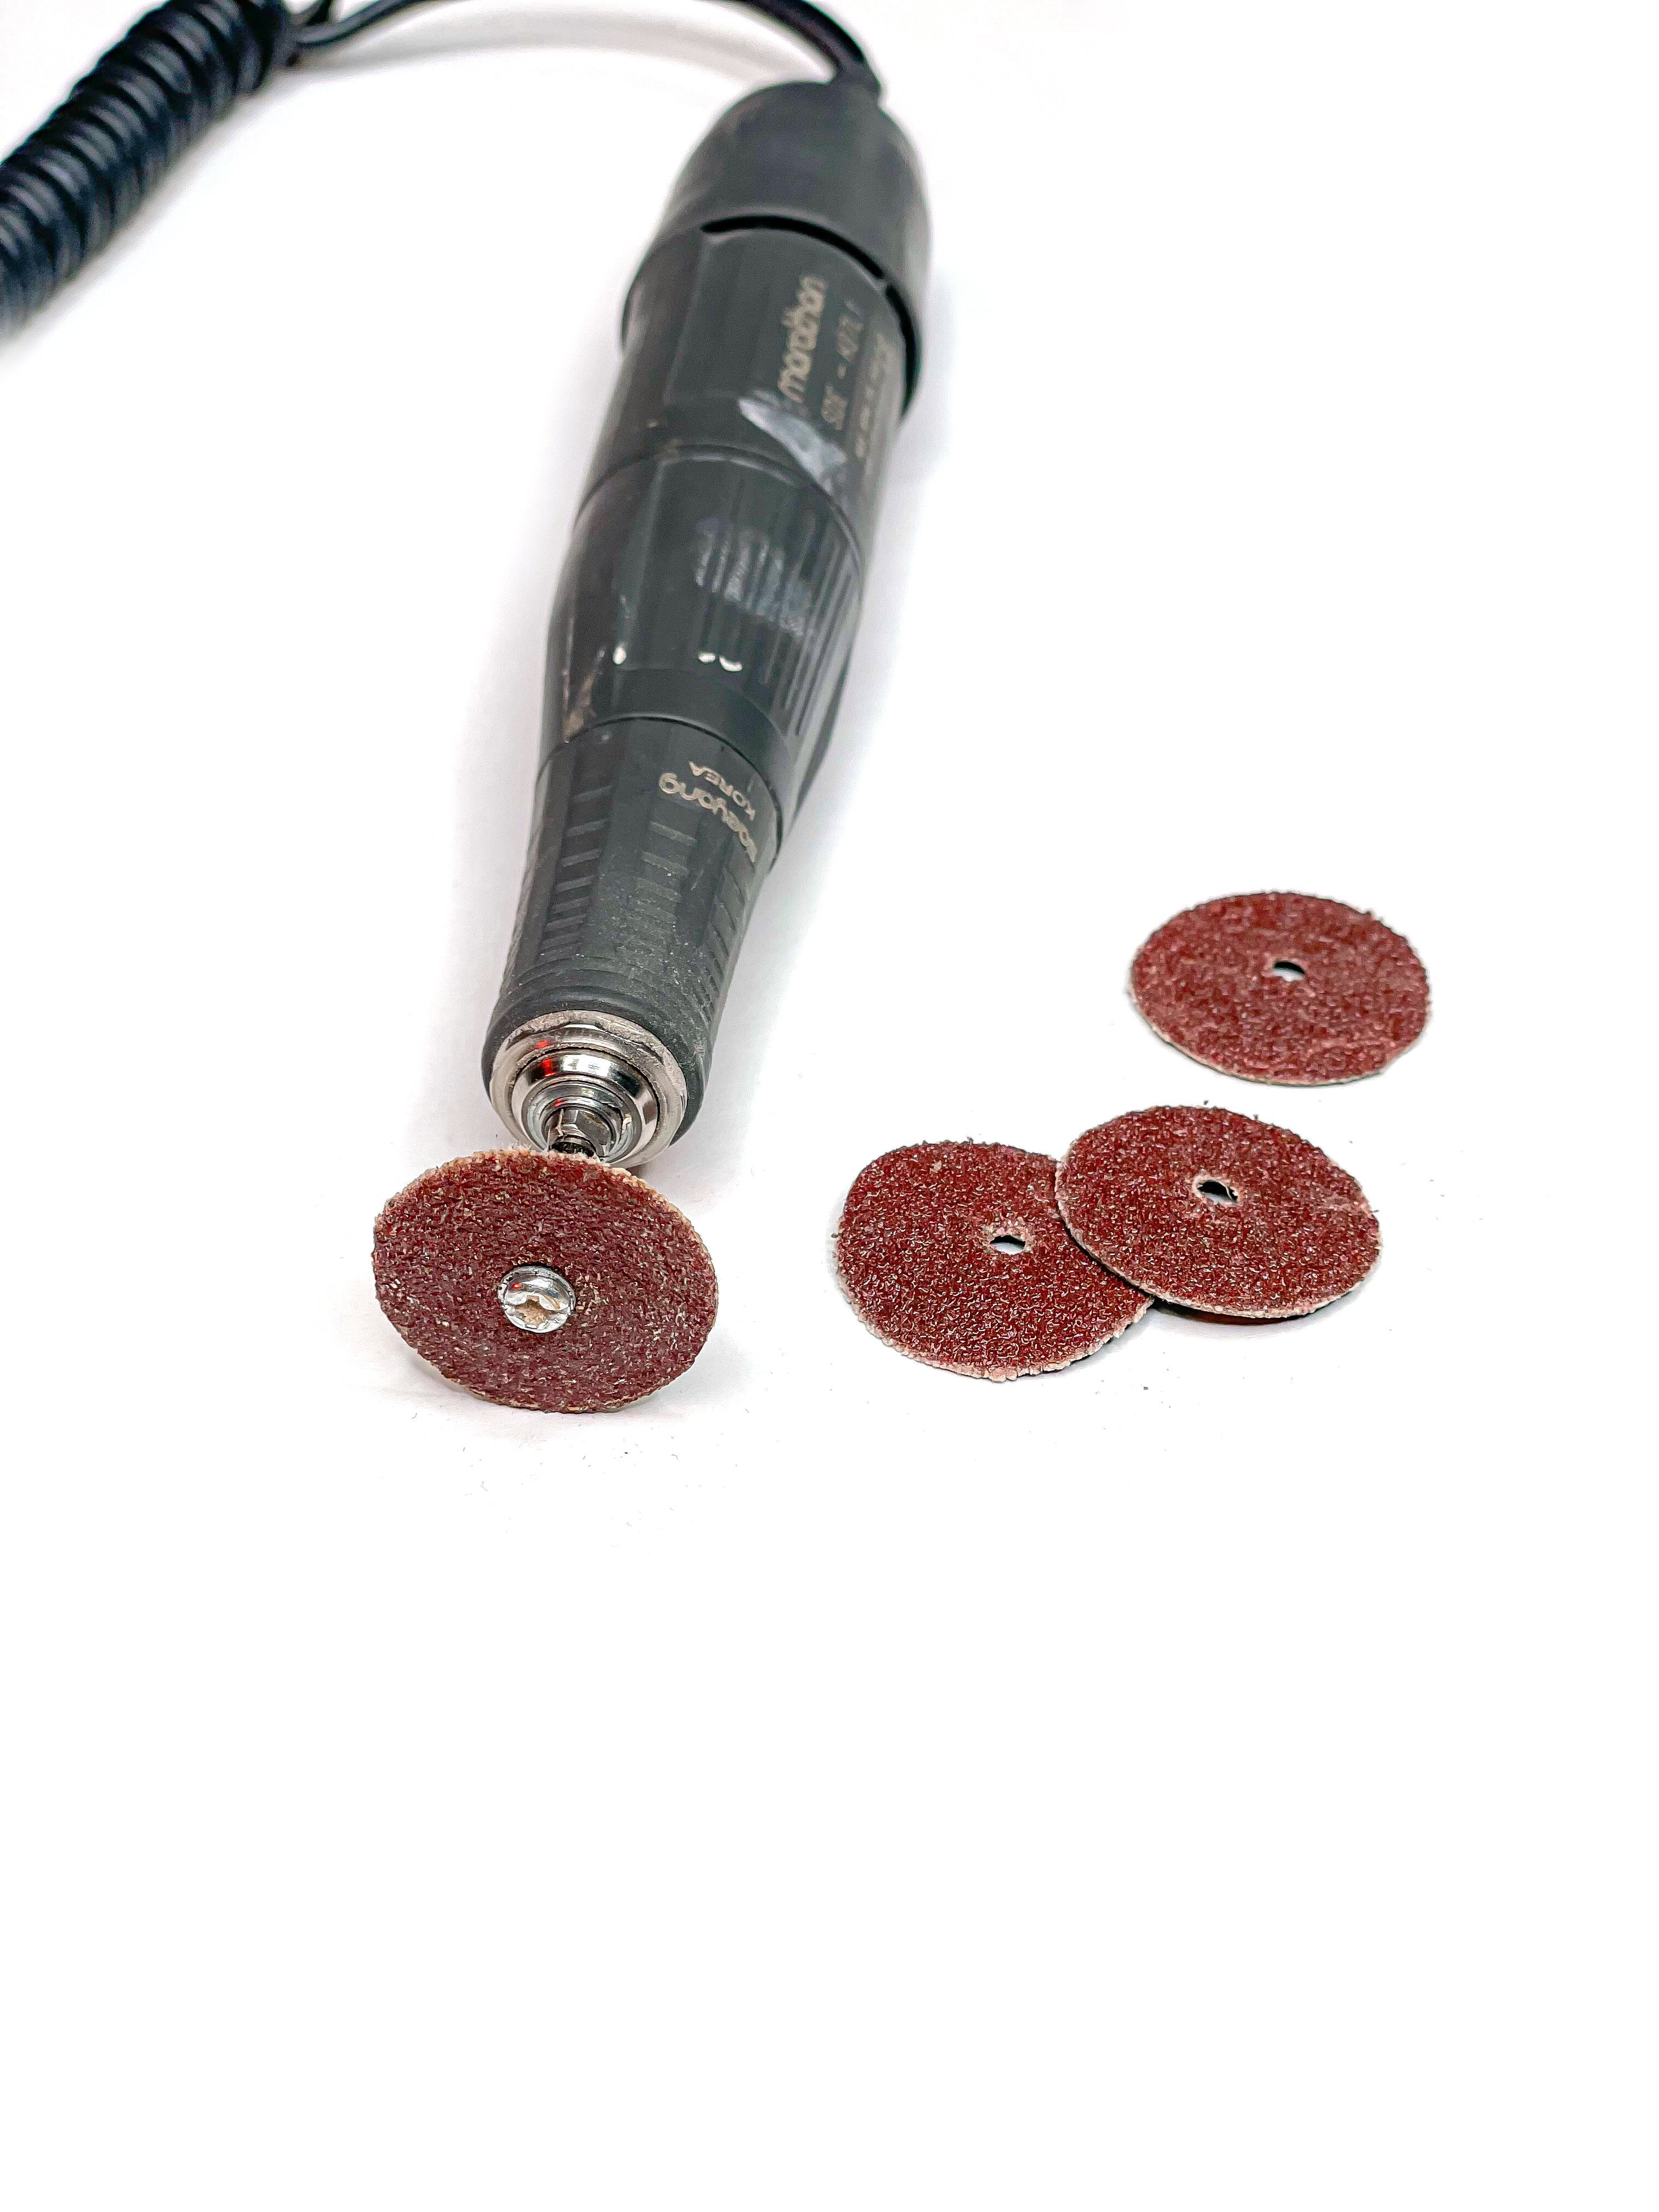 3 Simple Ways to Make Sanding Discs for your Dremel / Rotary Tool 